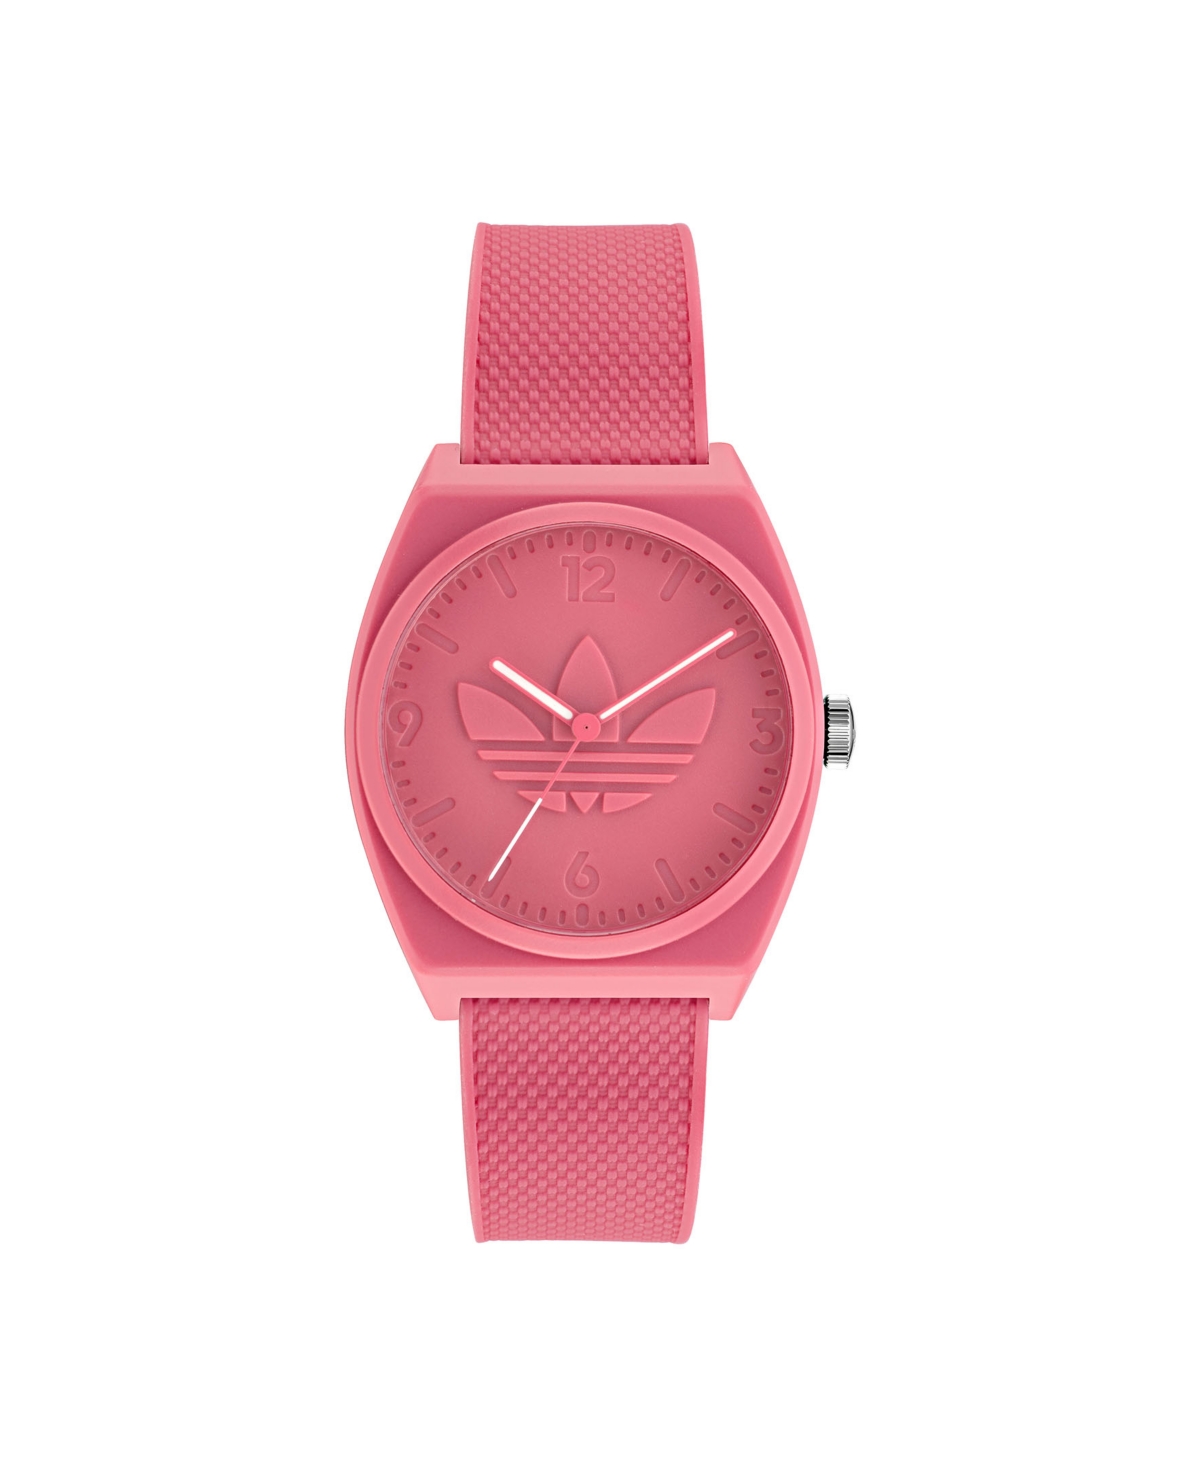 Unisex Three Hand Project Two Pink Resin Strap Watch 38mm - Pink